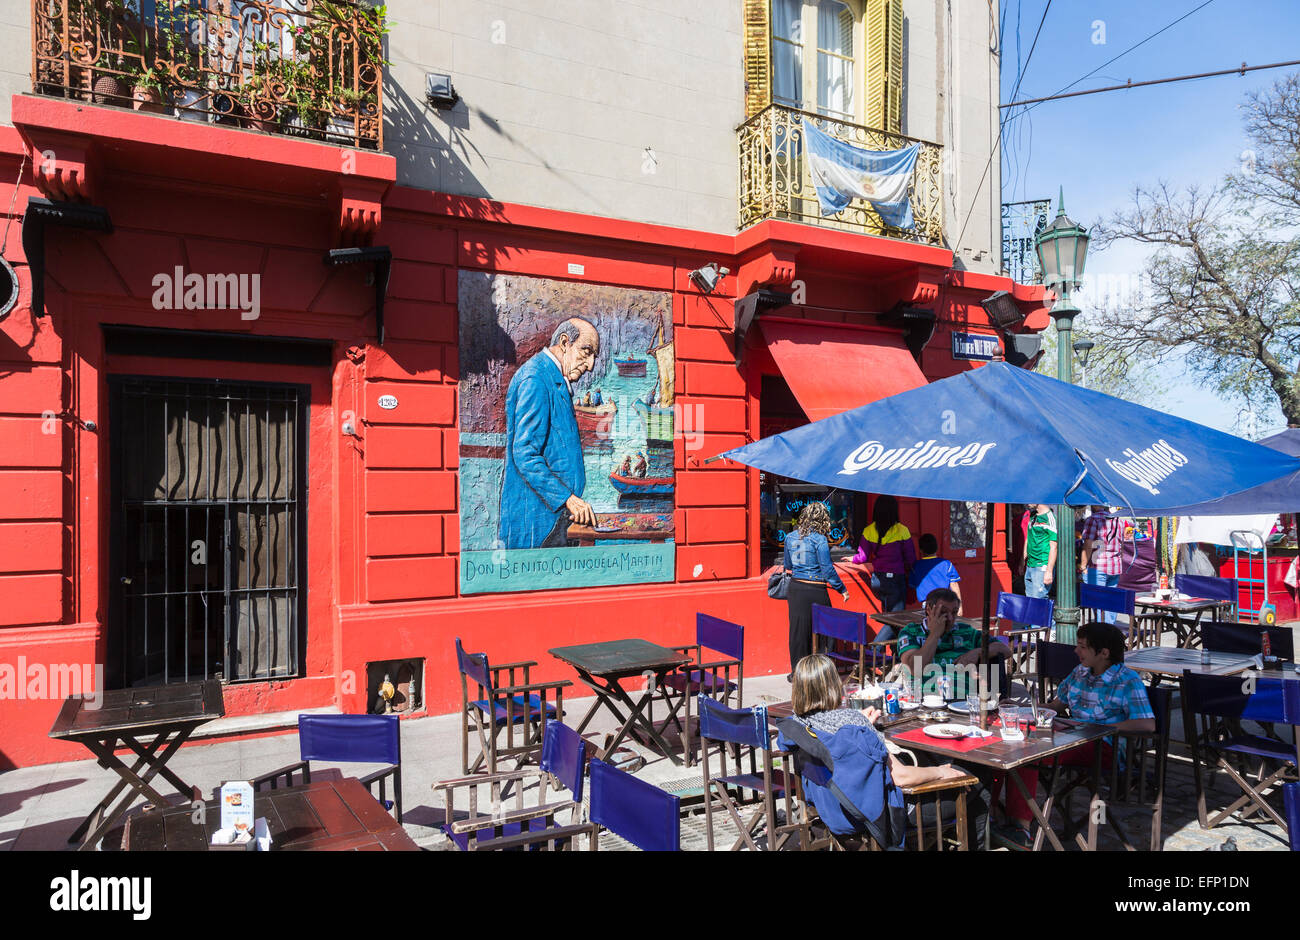 Colourful mural sign outside a roadside restaurant depicting artist Don Benito Quinquela Martin painting, La Boca, Buenos Aires, Argentina Stock Photo